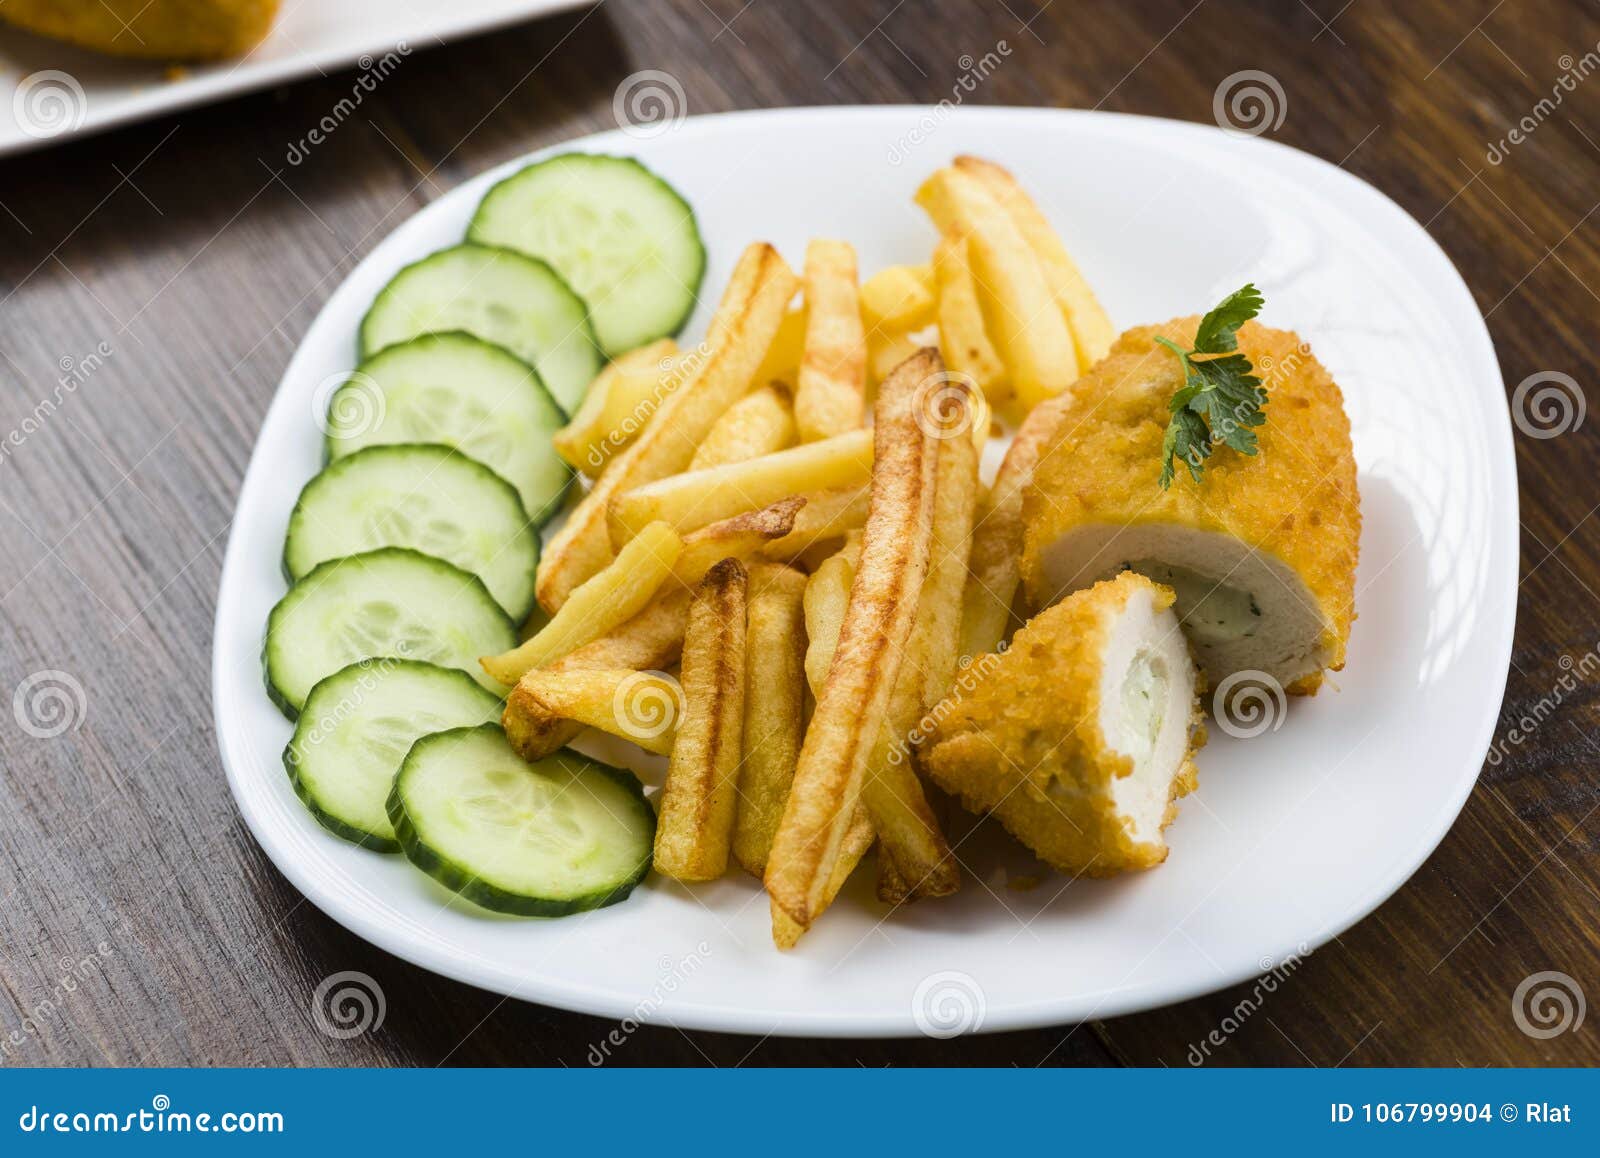 cutlet de volaille with fries